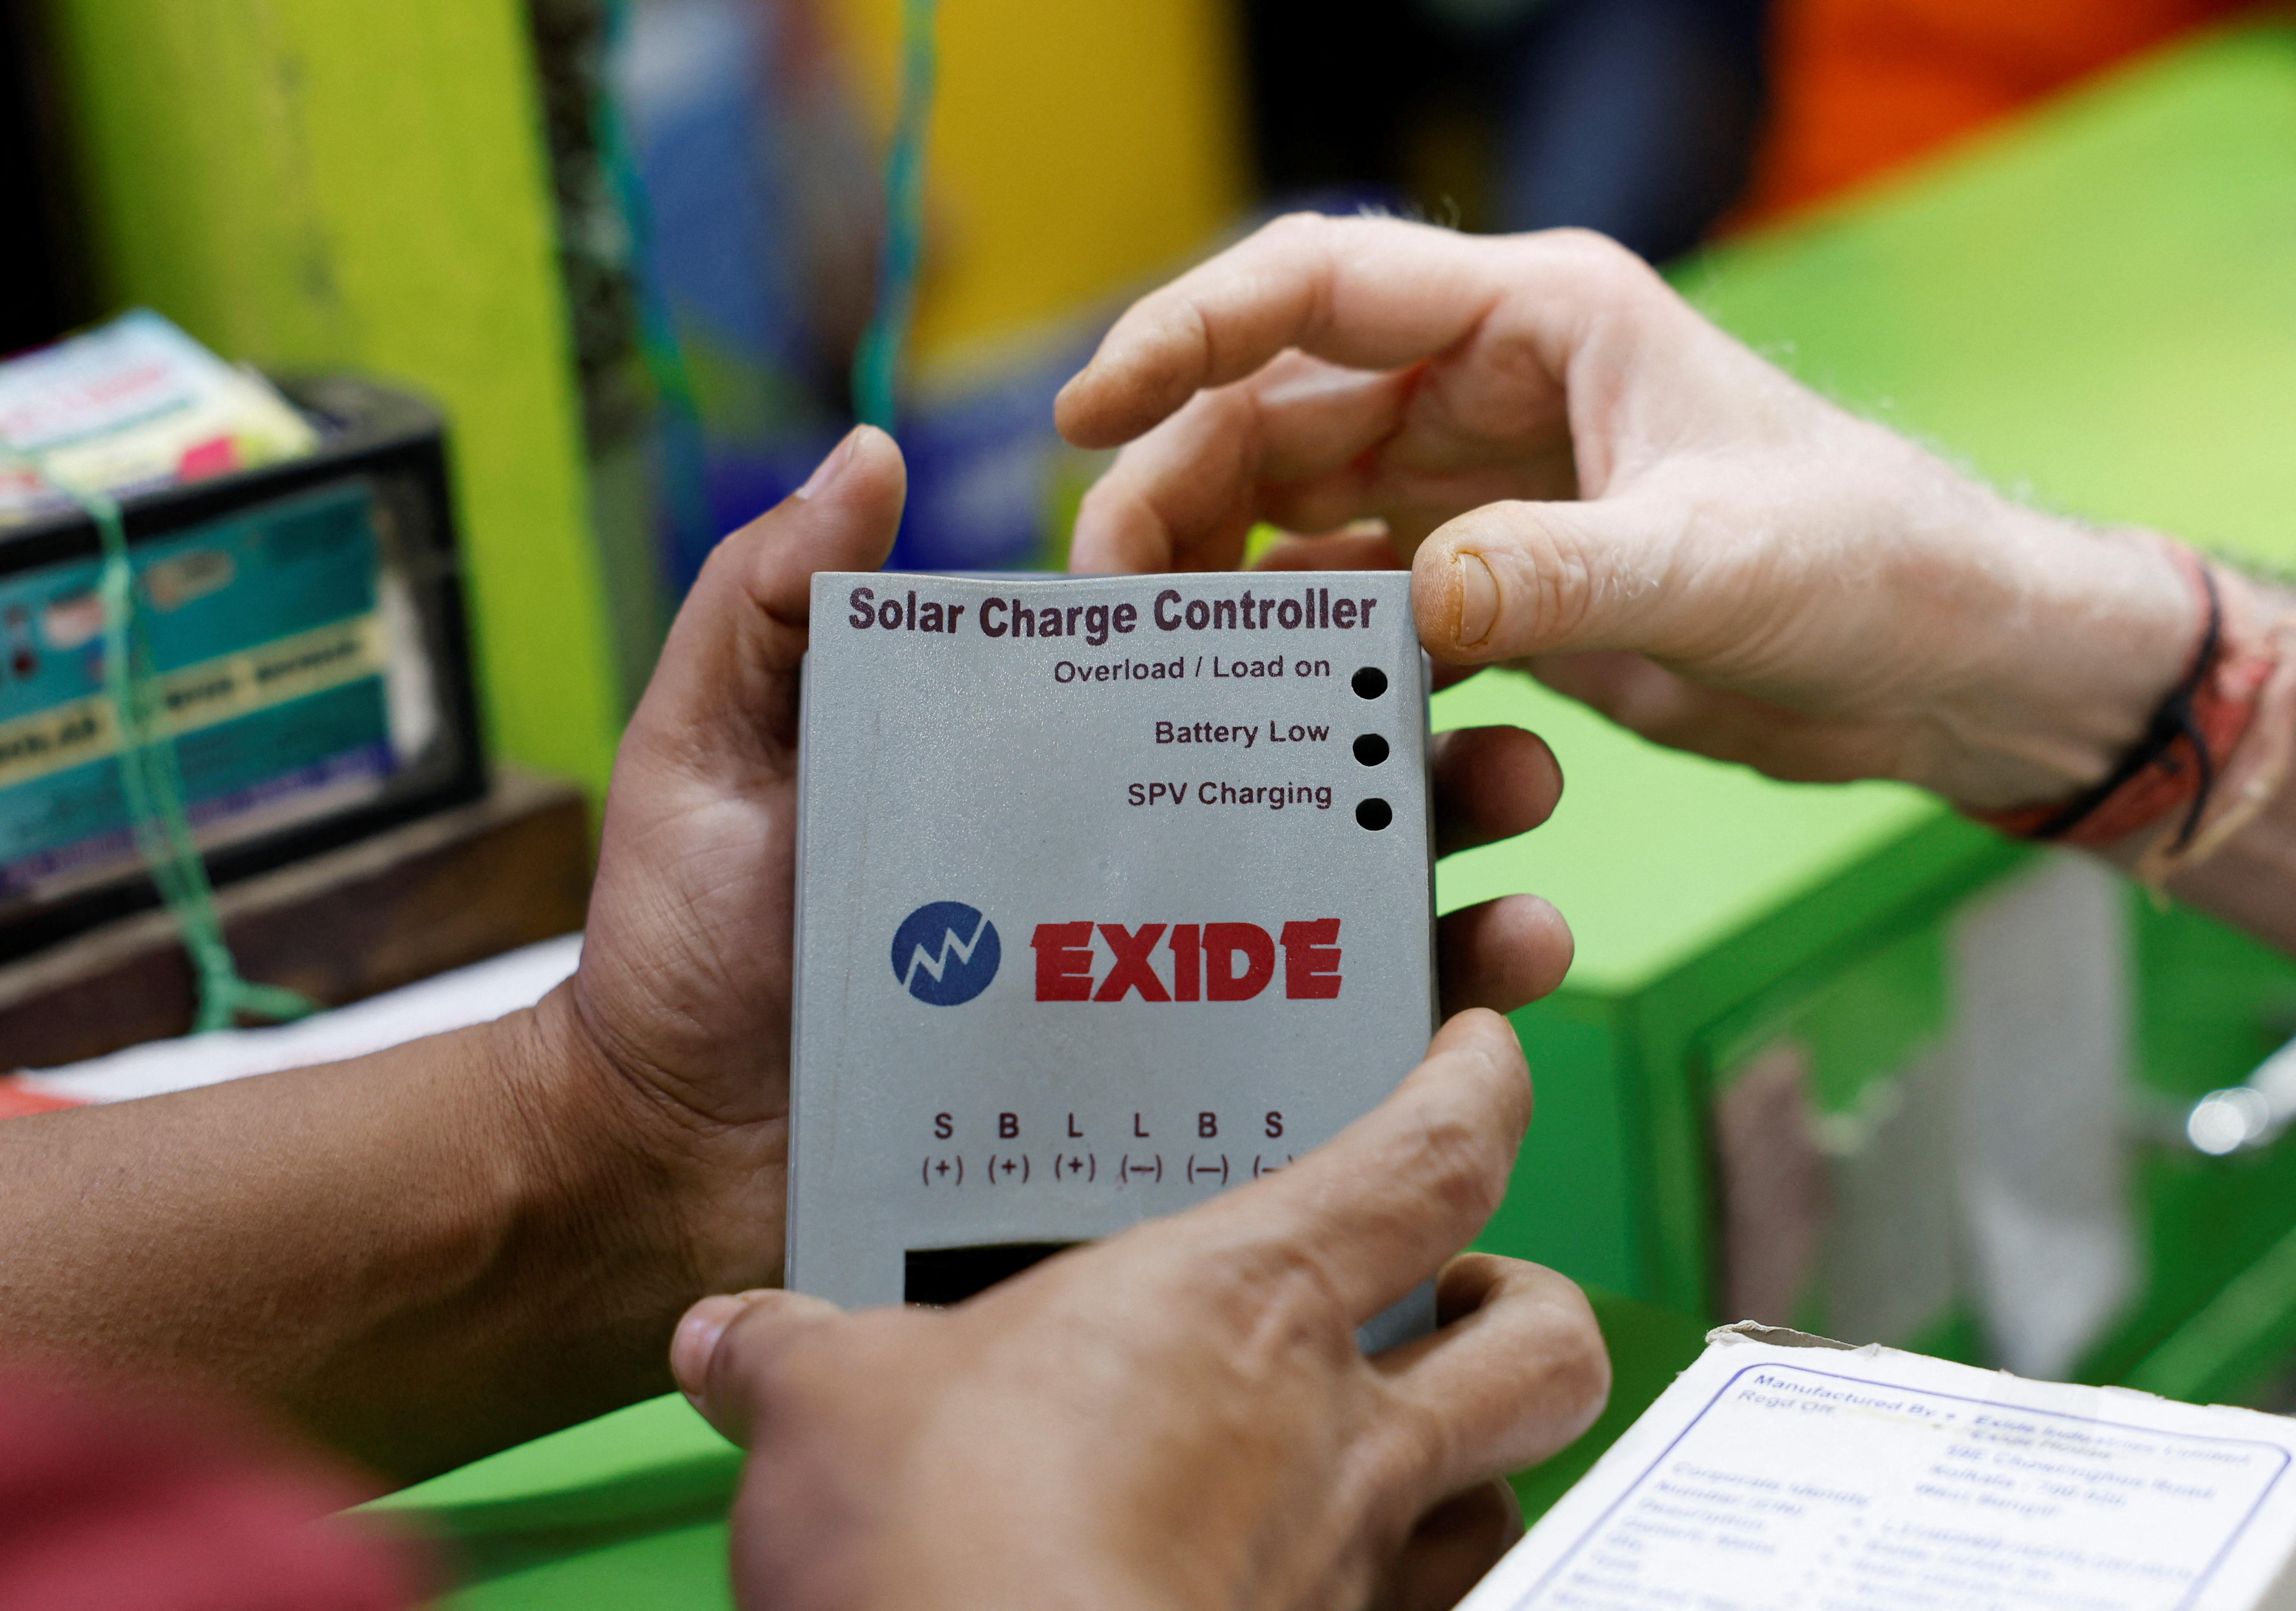 Customer looks at an Exide solar charge controller for purchase at a shop inside a wholesale electronics market in Kolkata